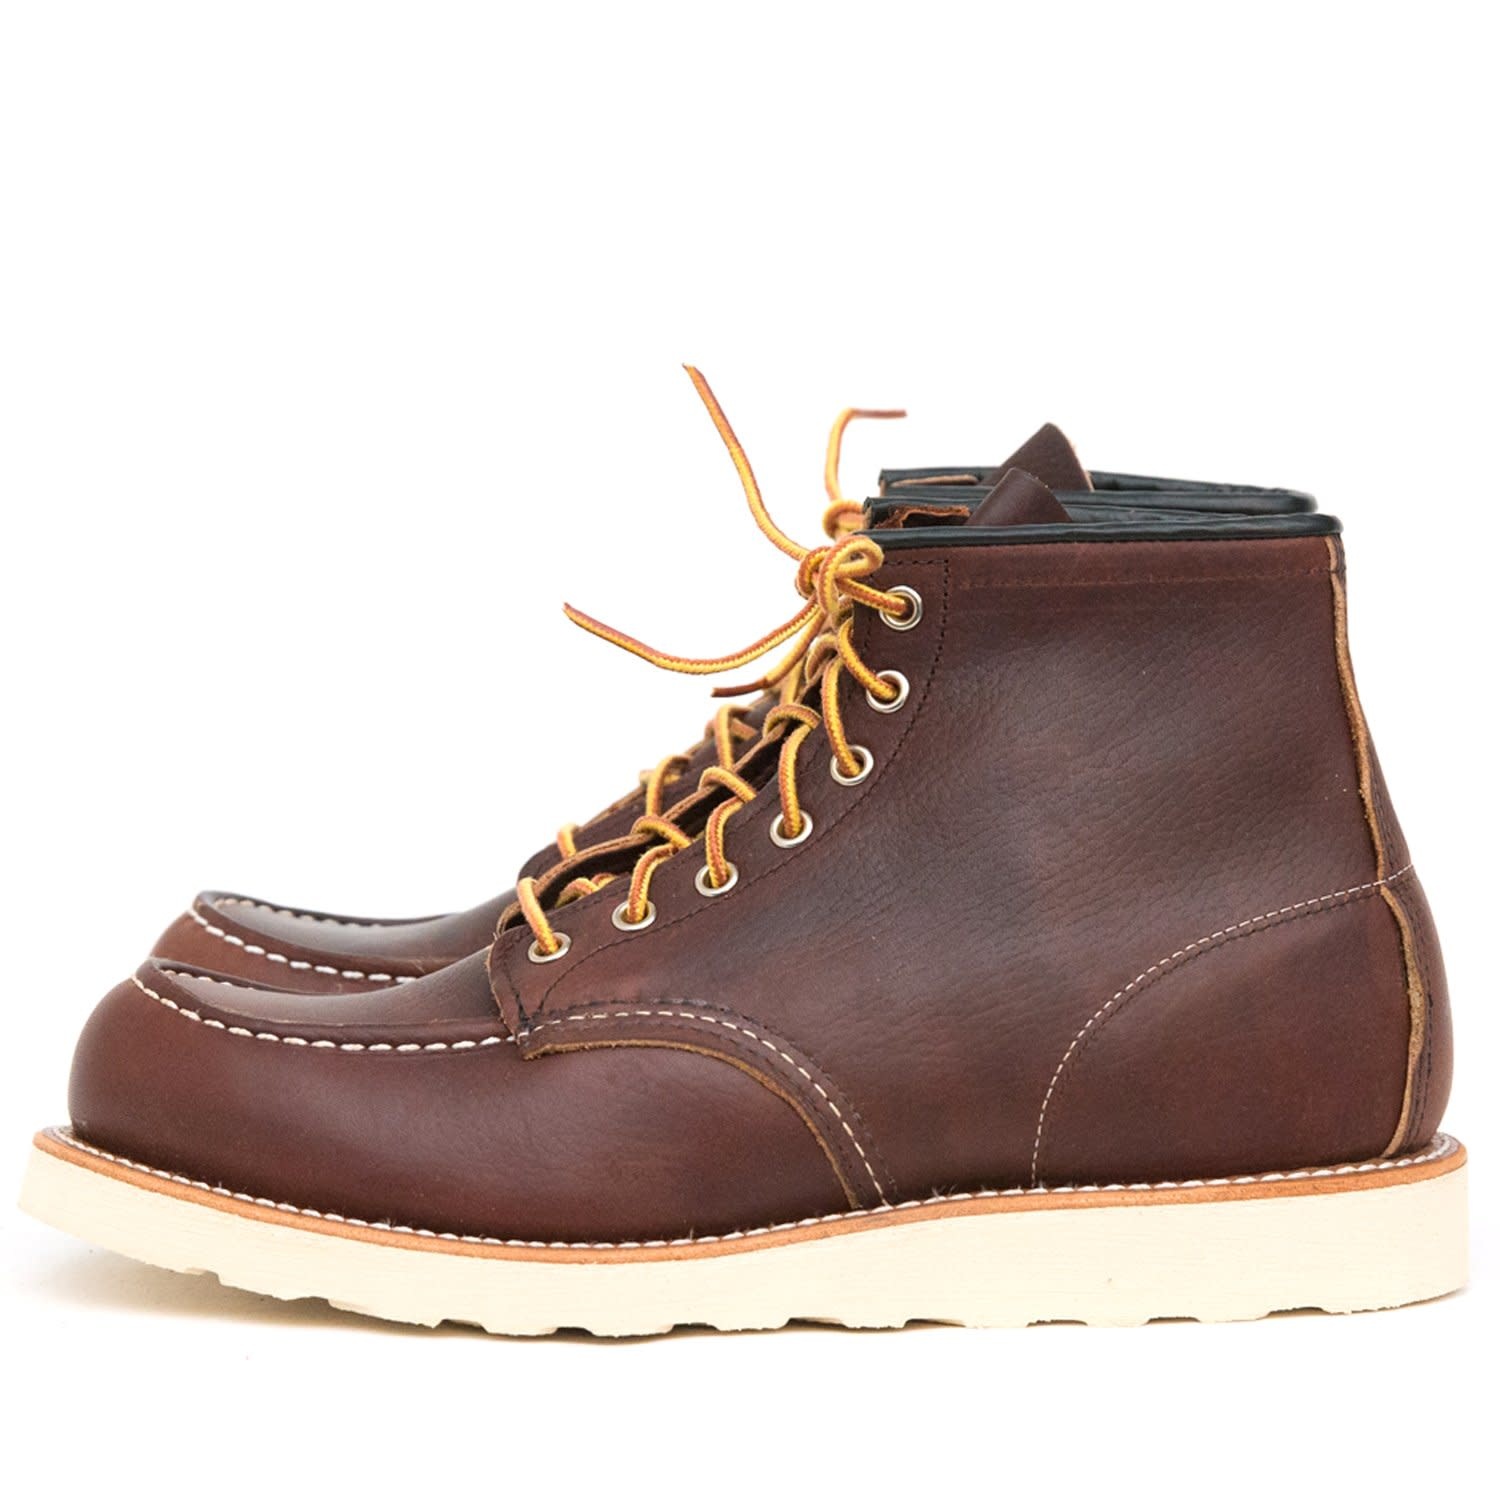 Red Wing Shoes 8138 Classic